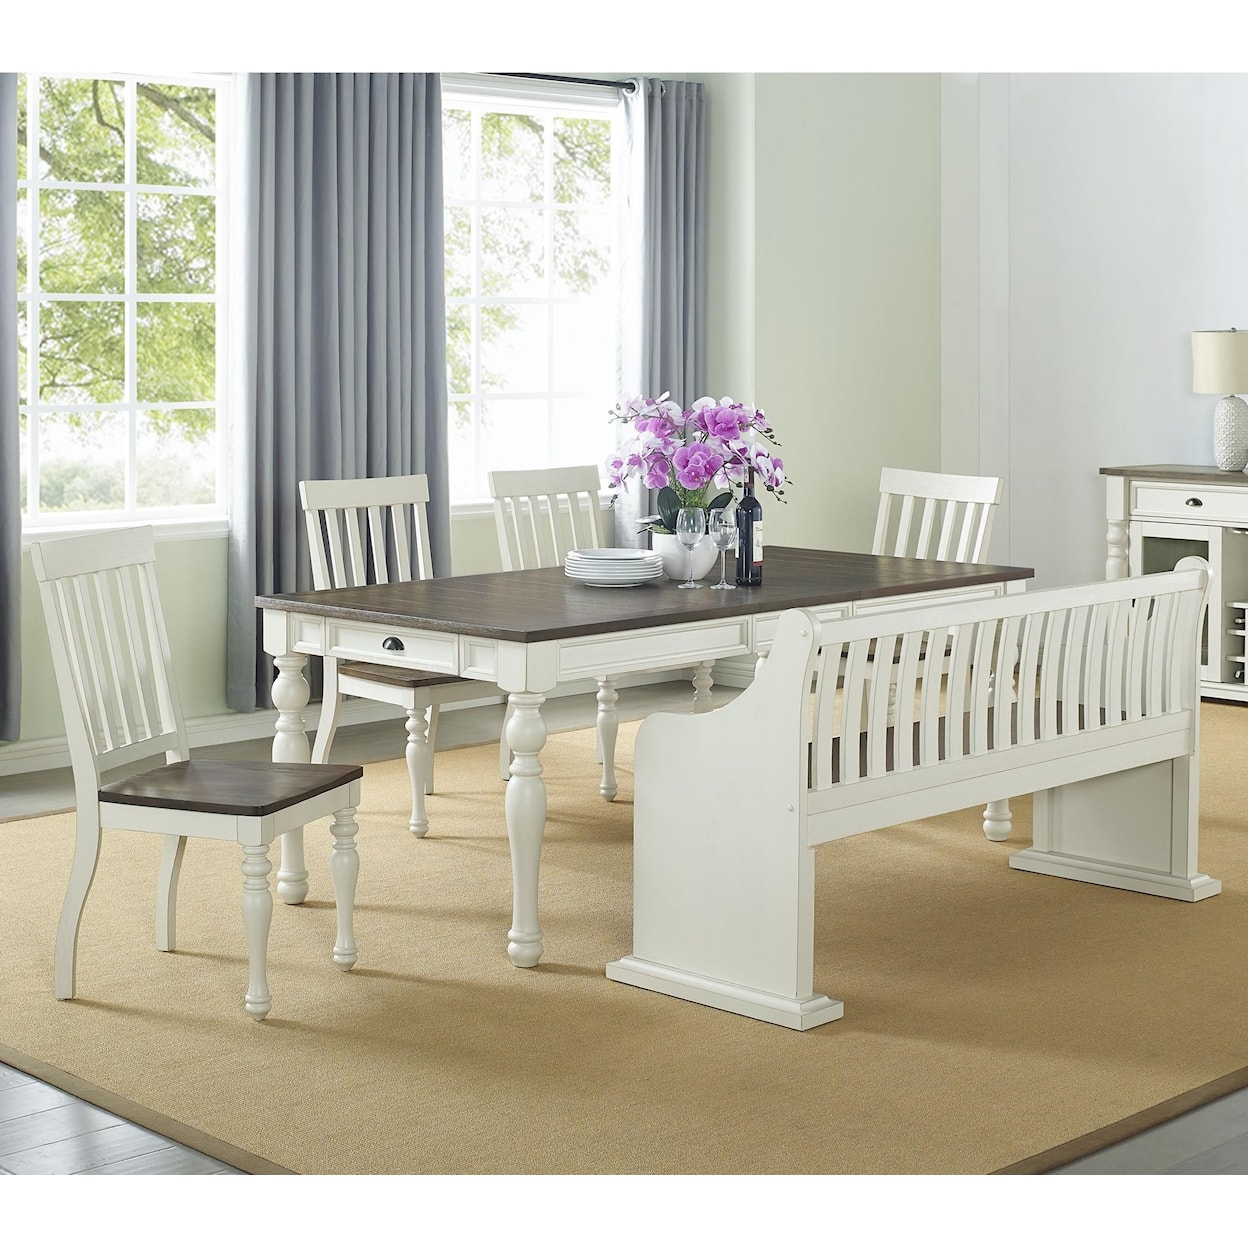 Prime Joanna Dining Set with Bench with Back